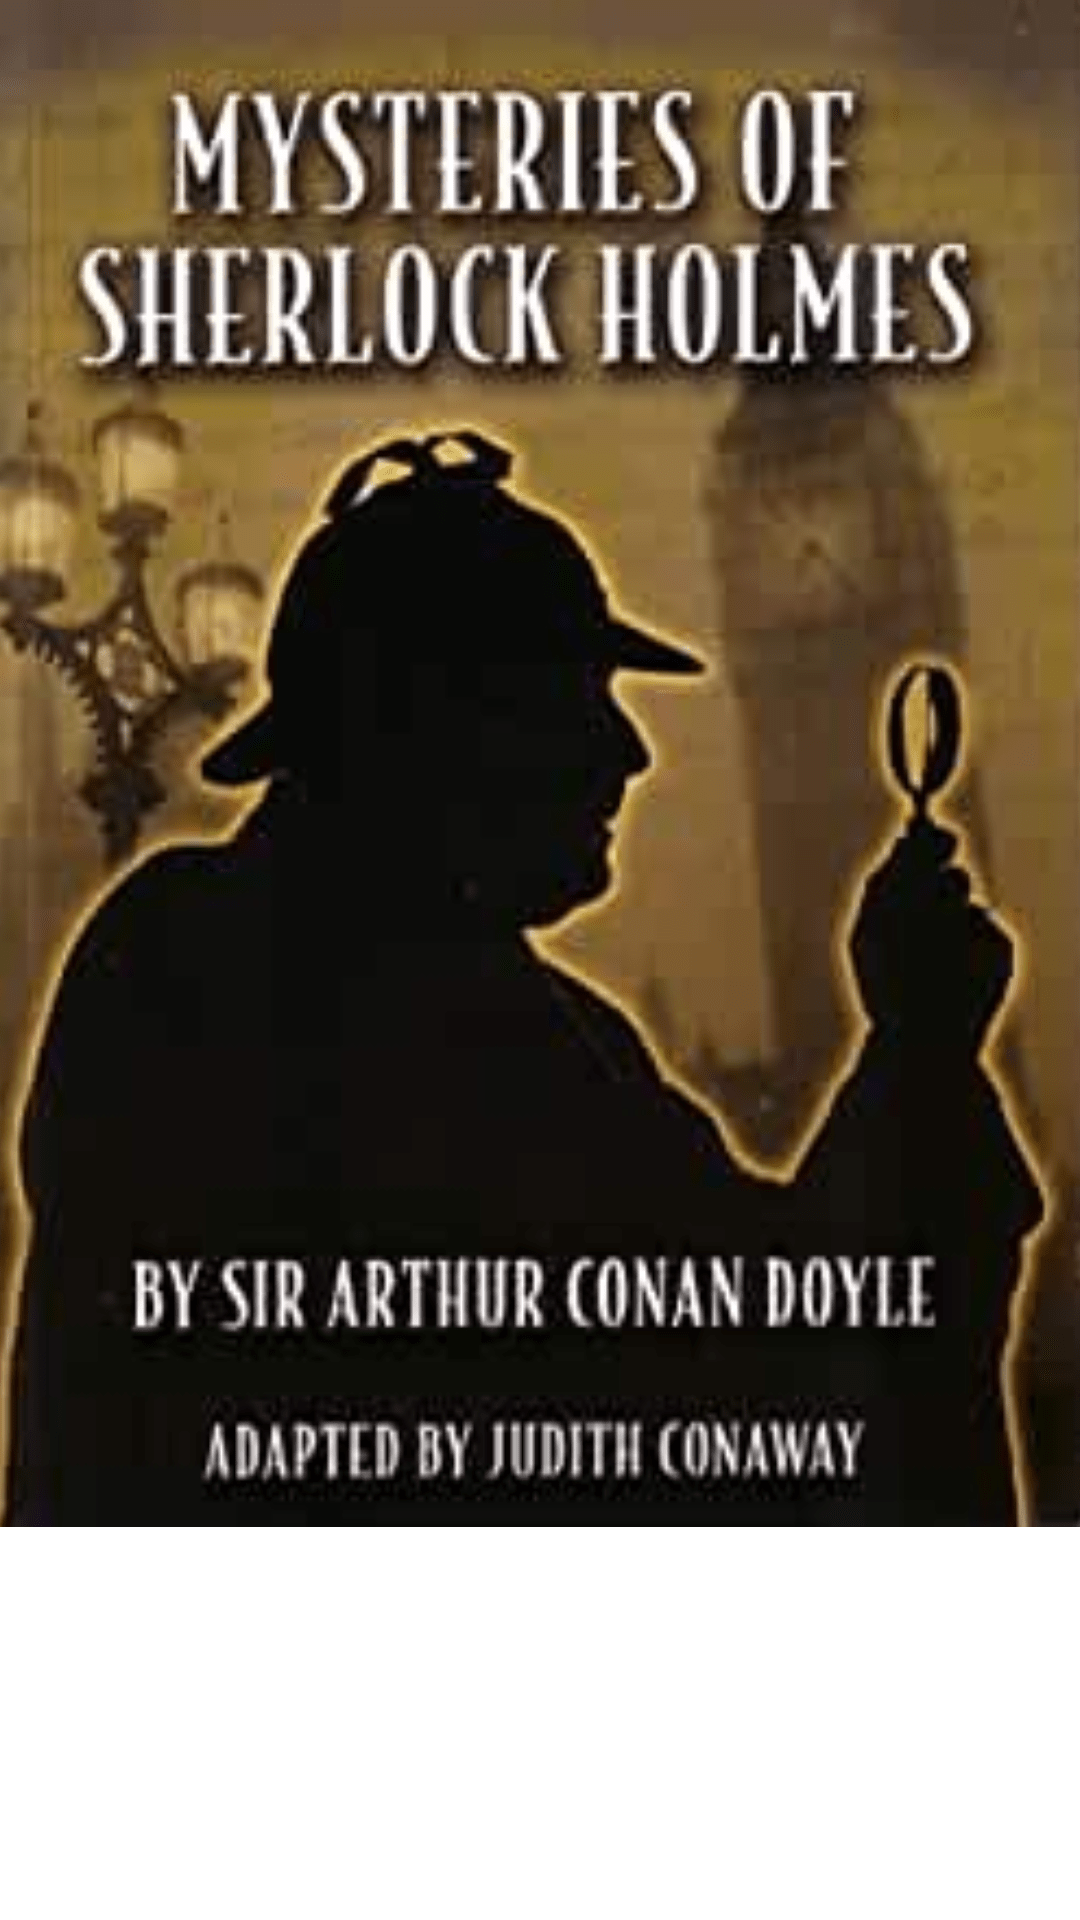 Mysteries of Sherlock Holmes adapted by Judith Conaway